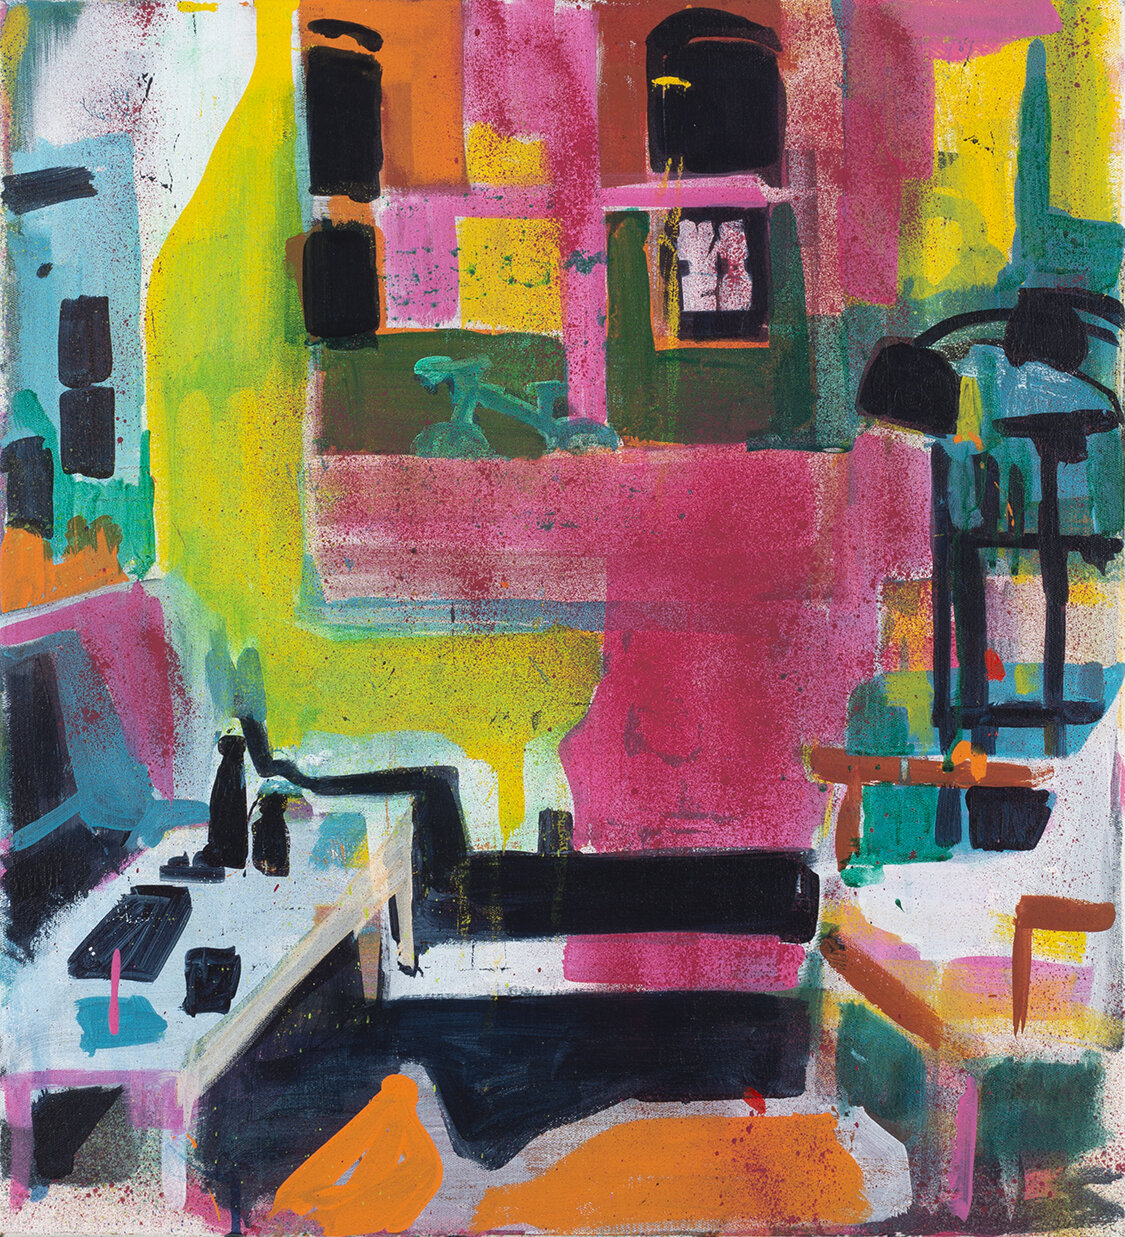   Bradley Street , 2021, acrylic and spray paint on canvas, 22 in. x 20 in. 